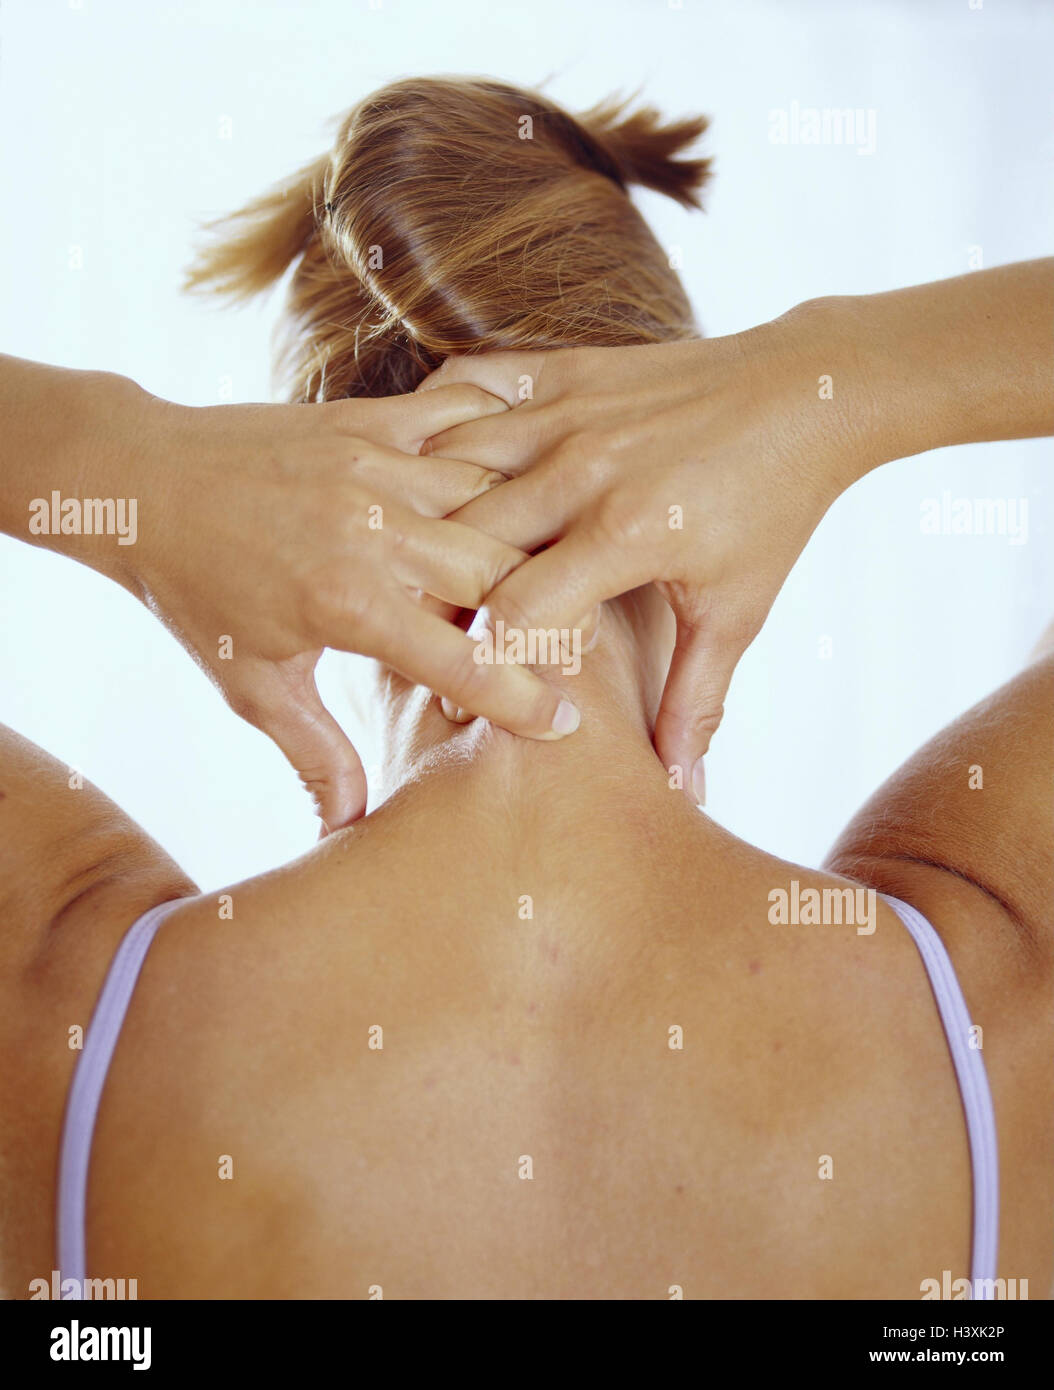 Woman, young, acupressure, nape, shoulders, back view autoacupressure, cure, medicine, alternatively, TCM, traditional Chinese medicine, therapy, grip, printing, printing treatment, selftreatment Stock Photo